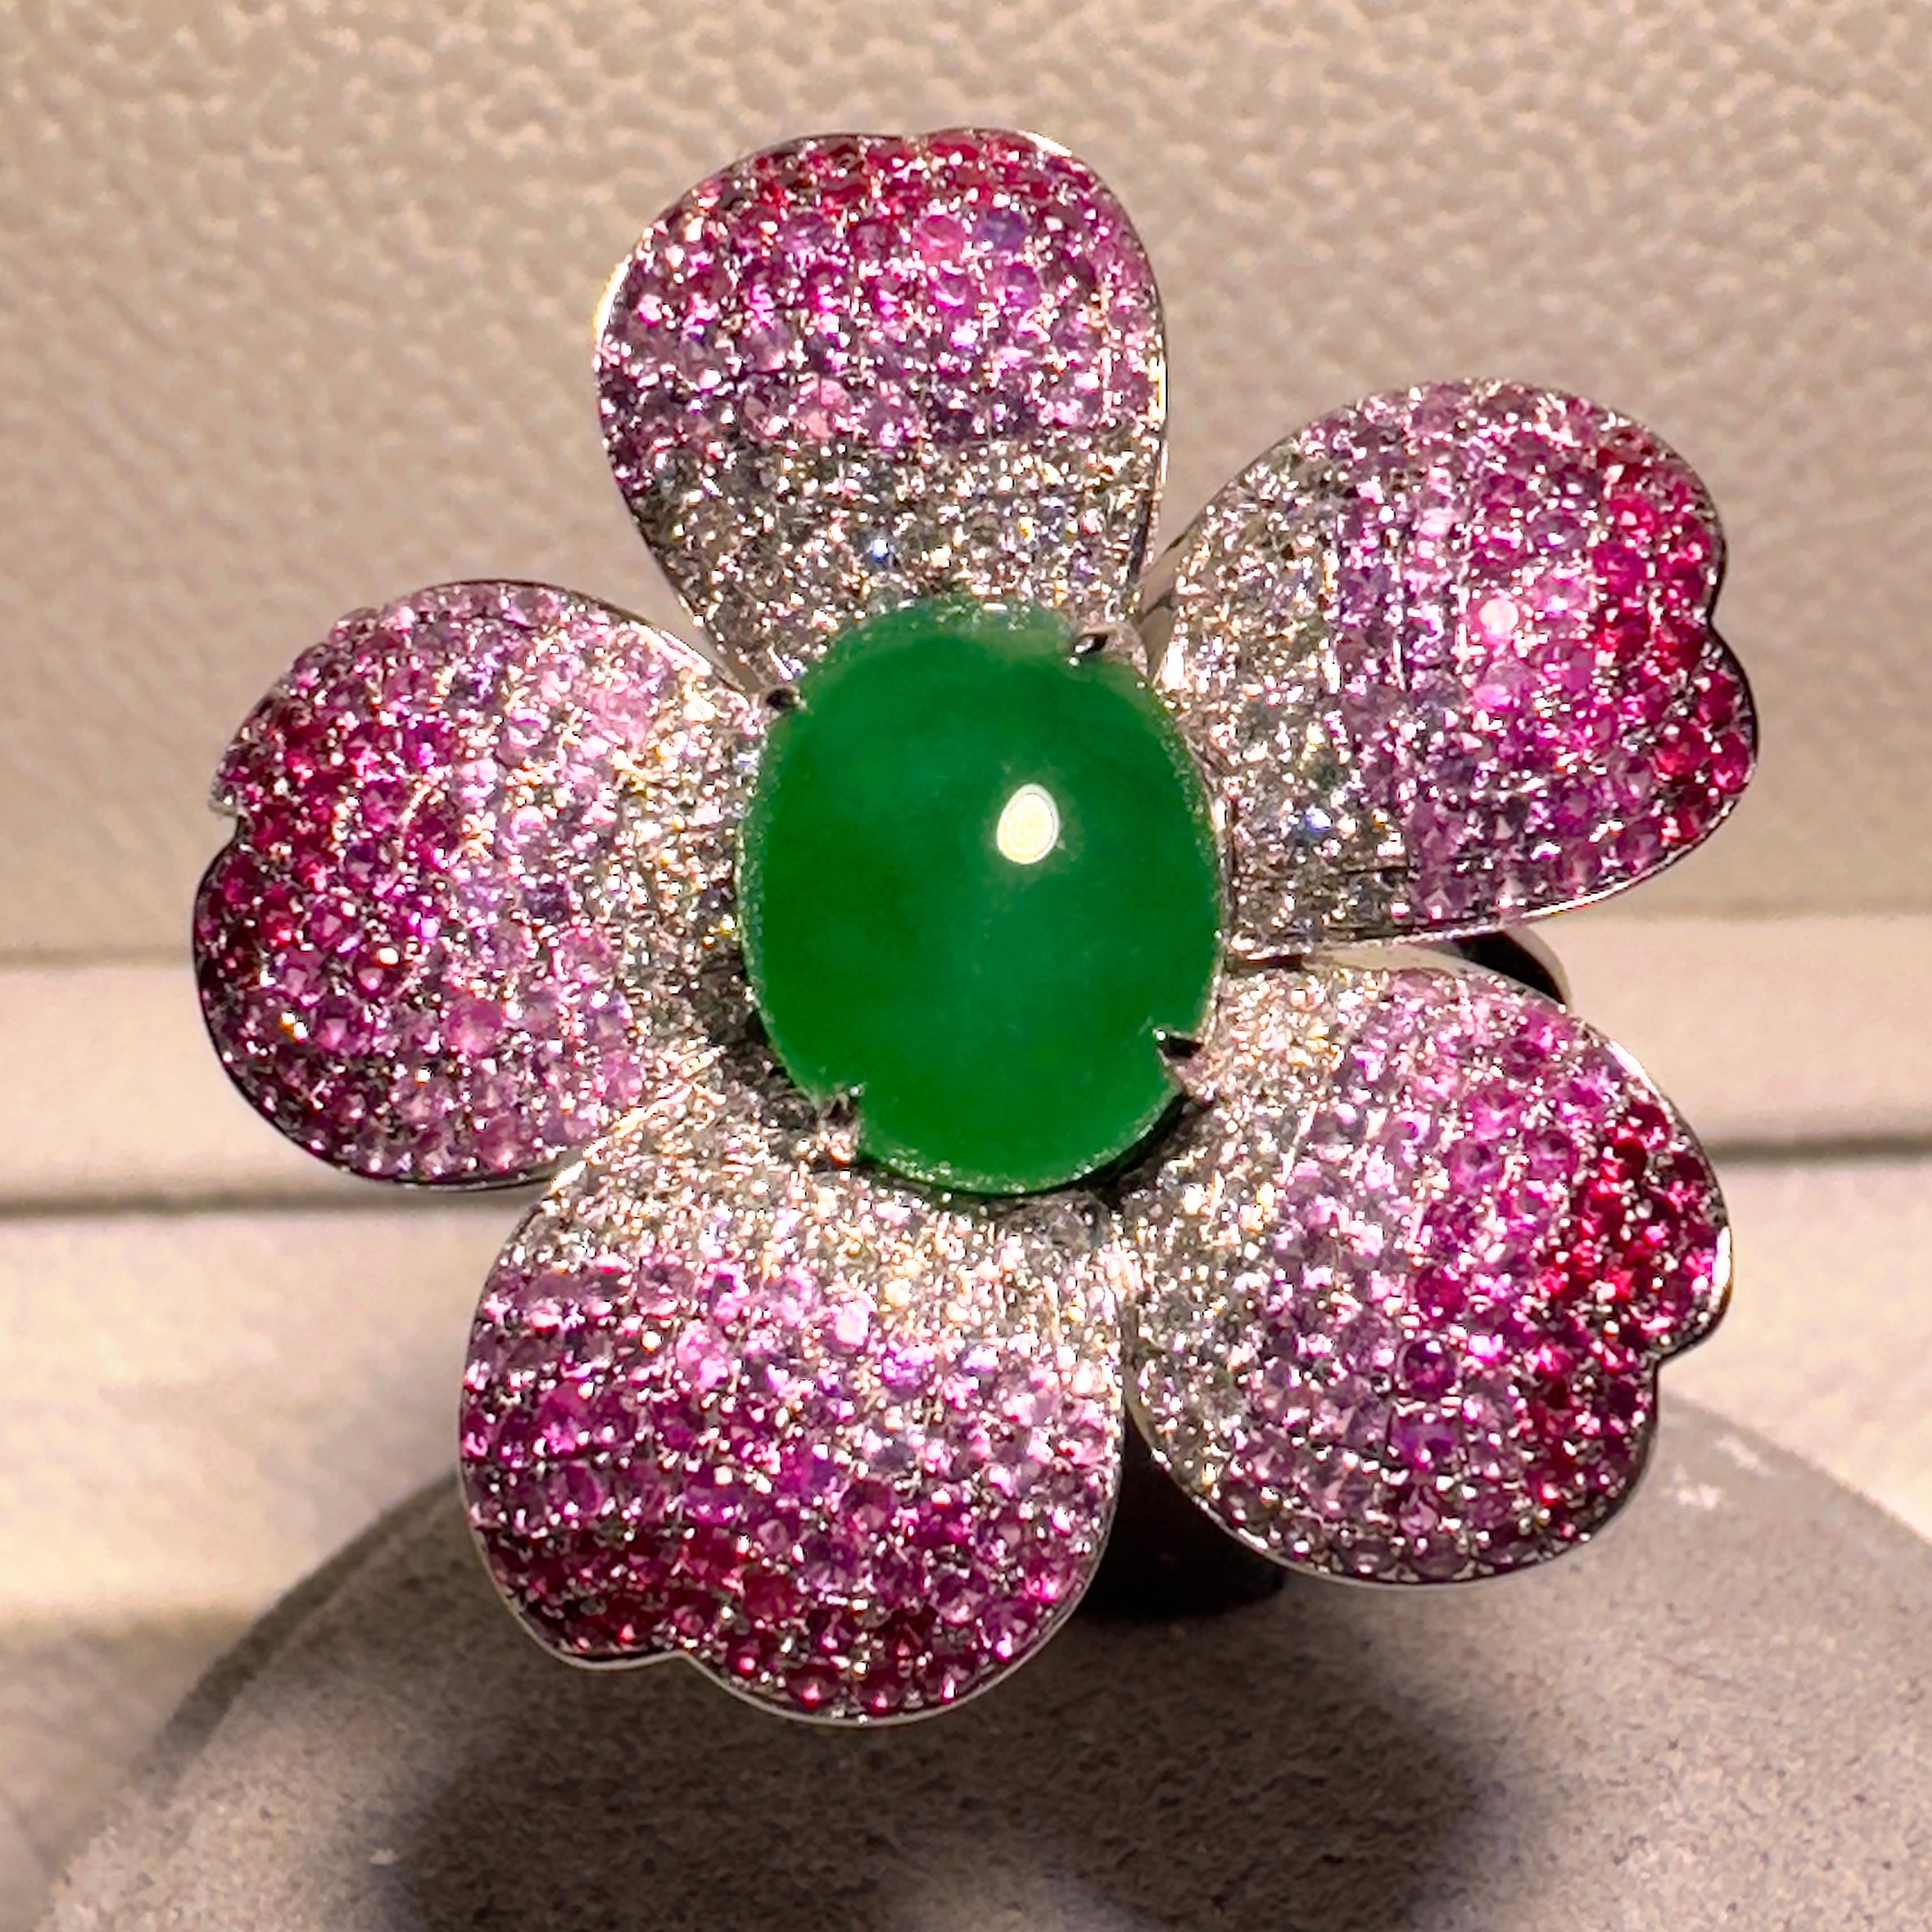 This ring is inspired by the cherry blossom. This is a convertible pendant ring which means it can be worn as a ring or as a pendant. The Type A Green Jadeite is located at the center of the ring and is surrounded by 5 cherry blossom petals. Each